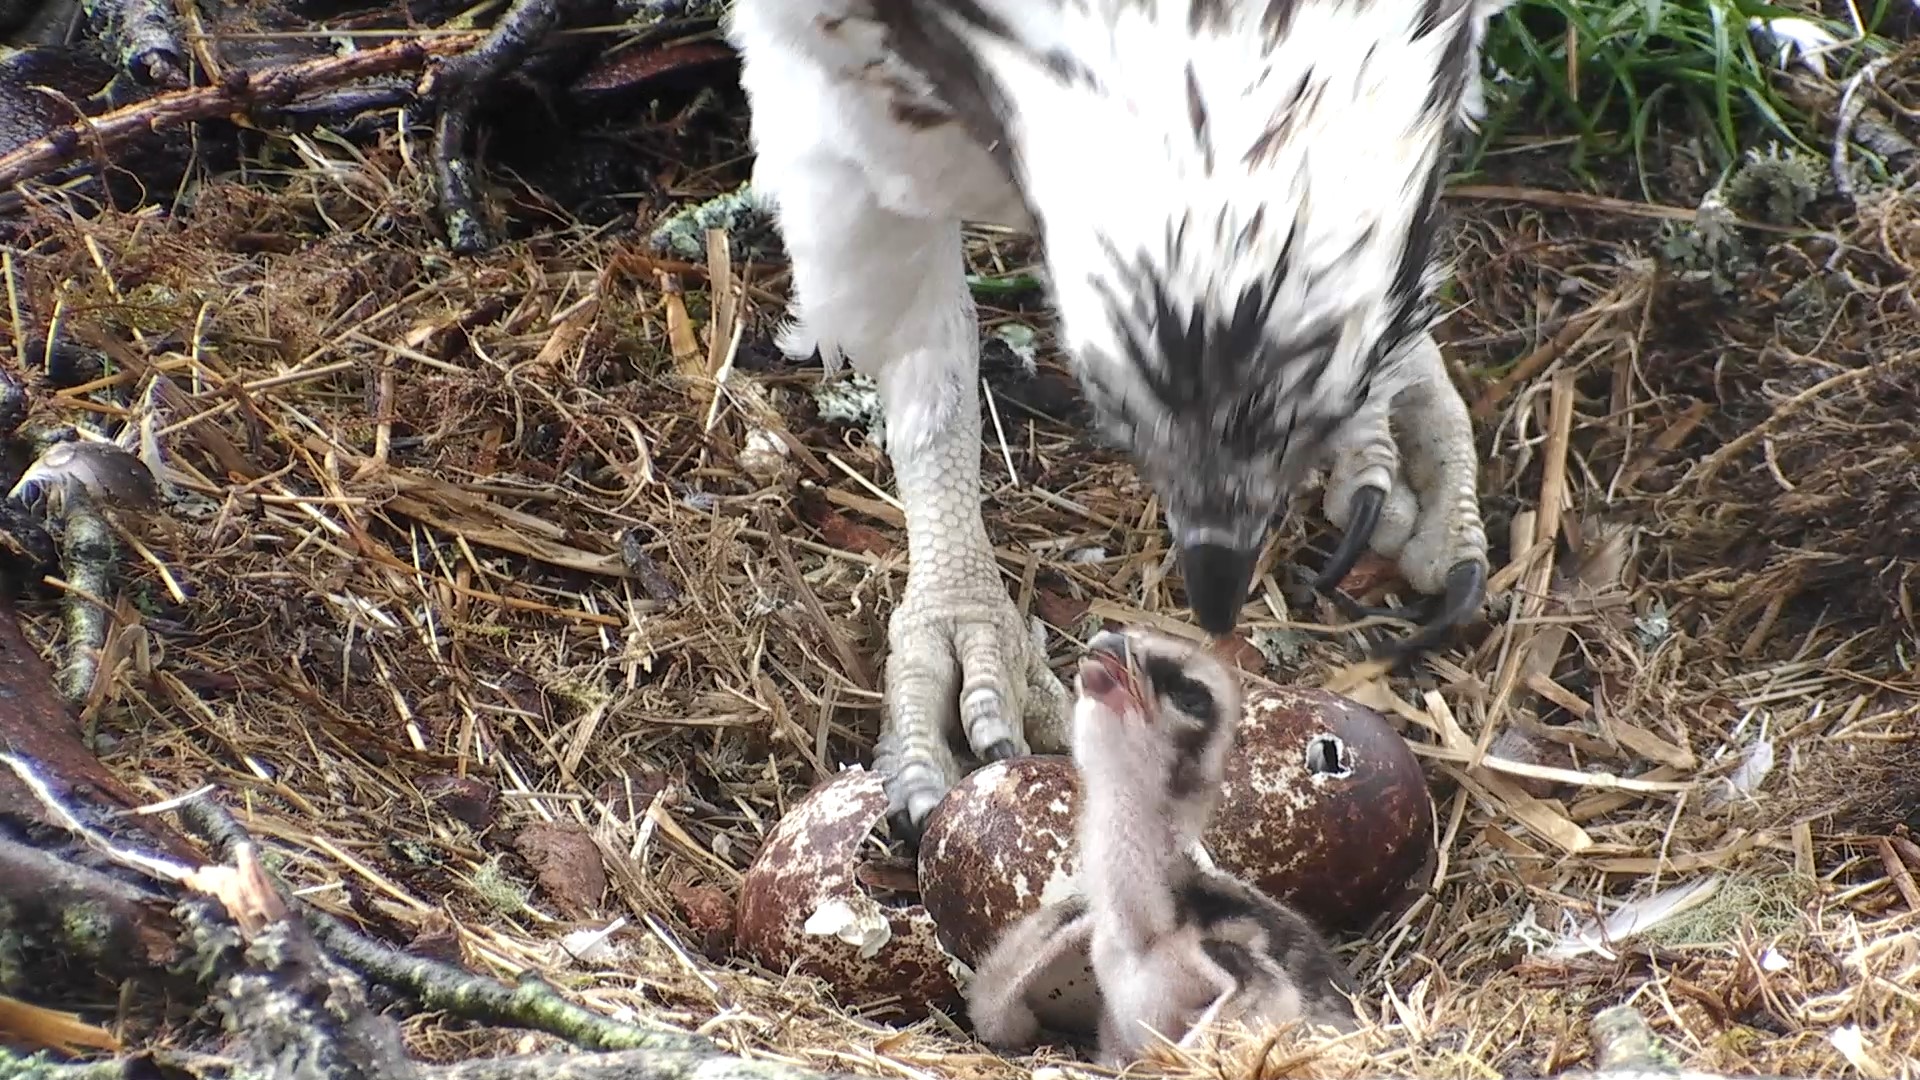 Our new chick with its sibling on the way © Scottish Wildlife Trust